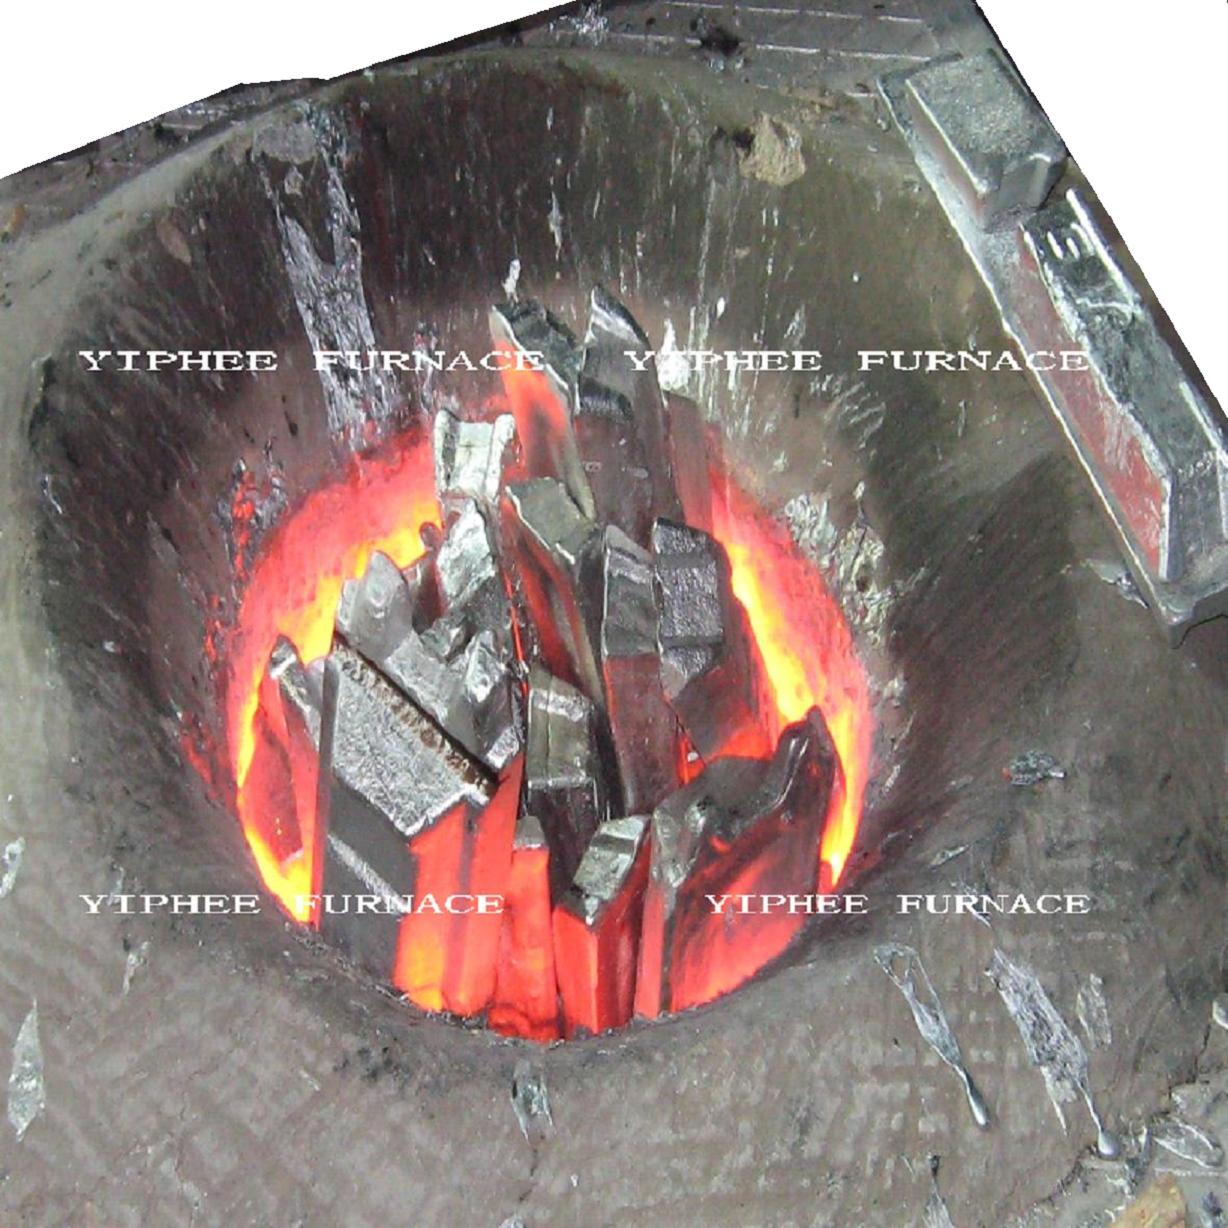 Medium frequency electric furnace 750 kg capacity